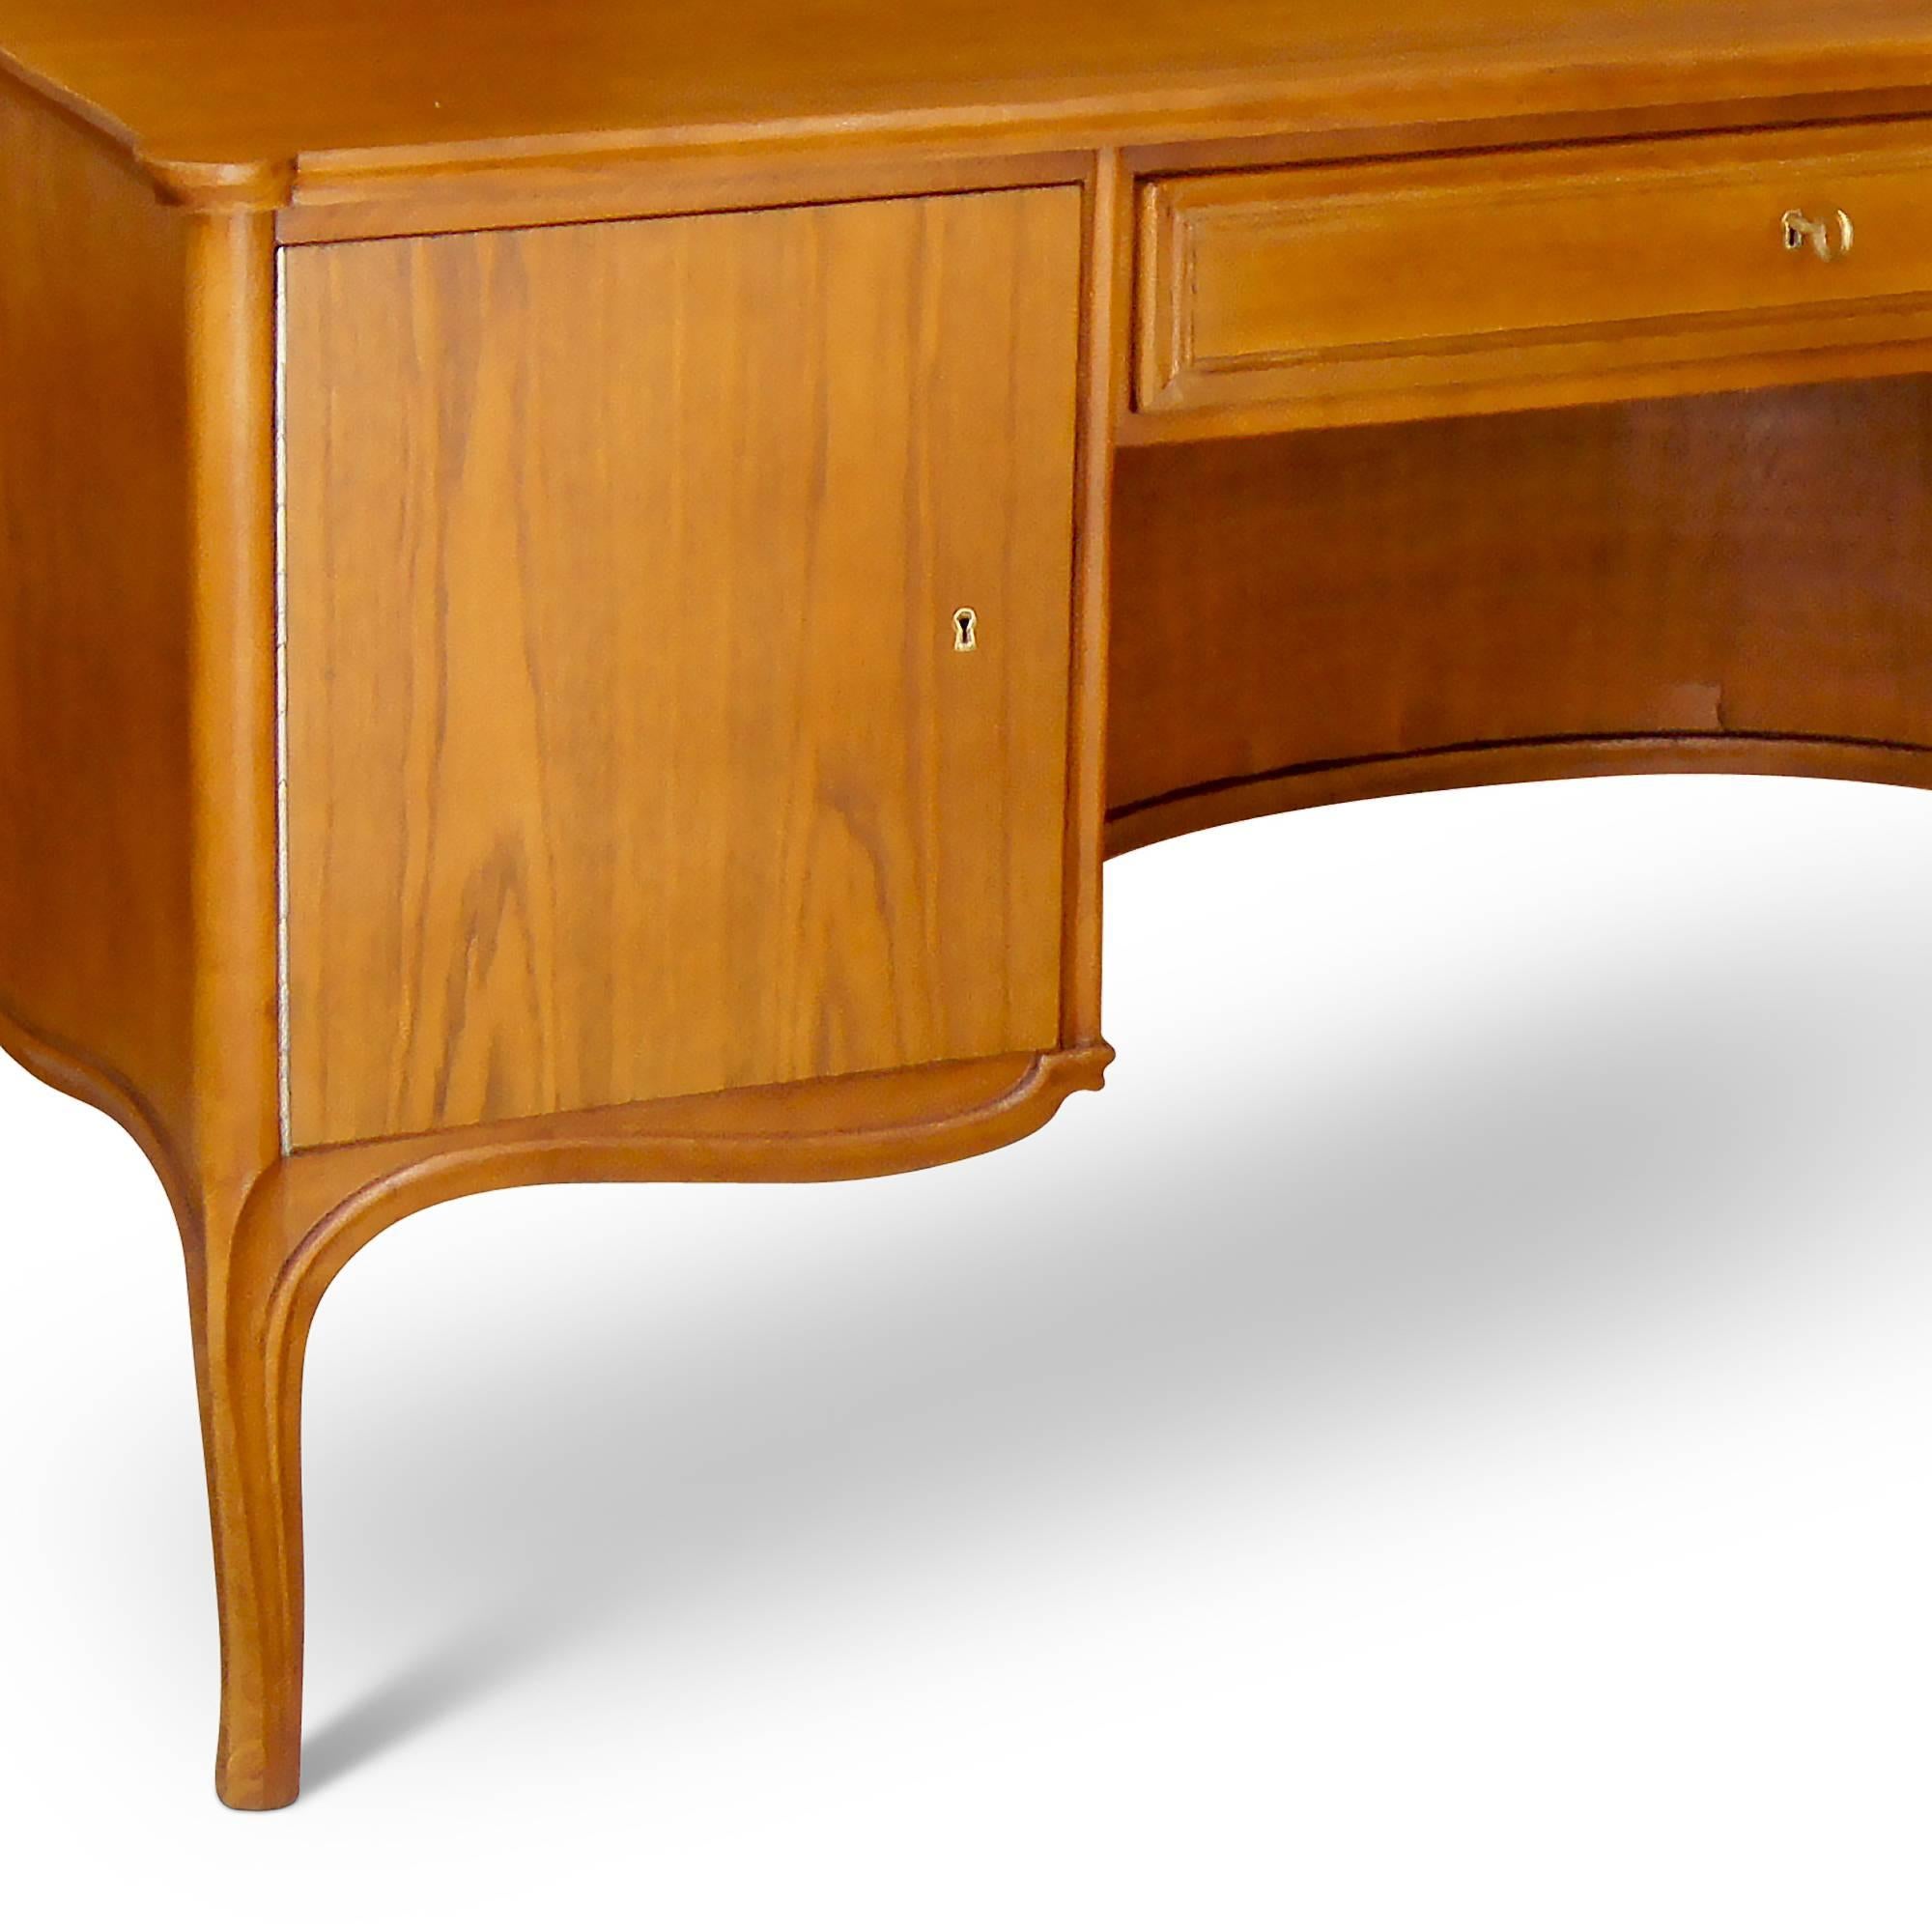 Equally elegant and practical, this rare kneehole desk design by Frits Henningsen (1889-1965) is a wonderful example of this 20th century Danish master's talent for adapting historical furniture types for modern living. A functional workhorse, this